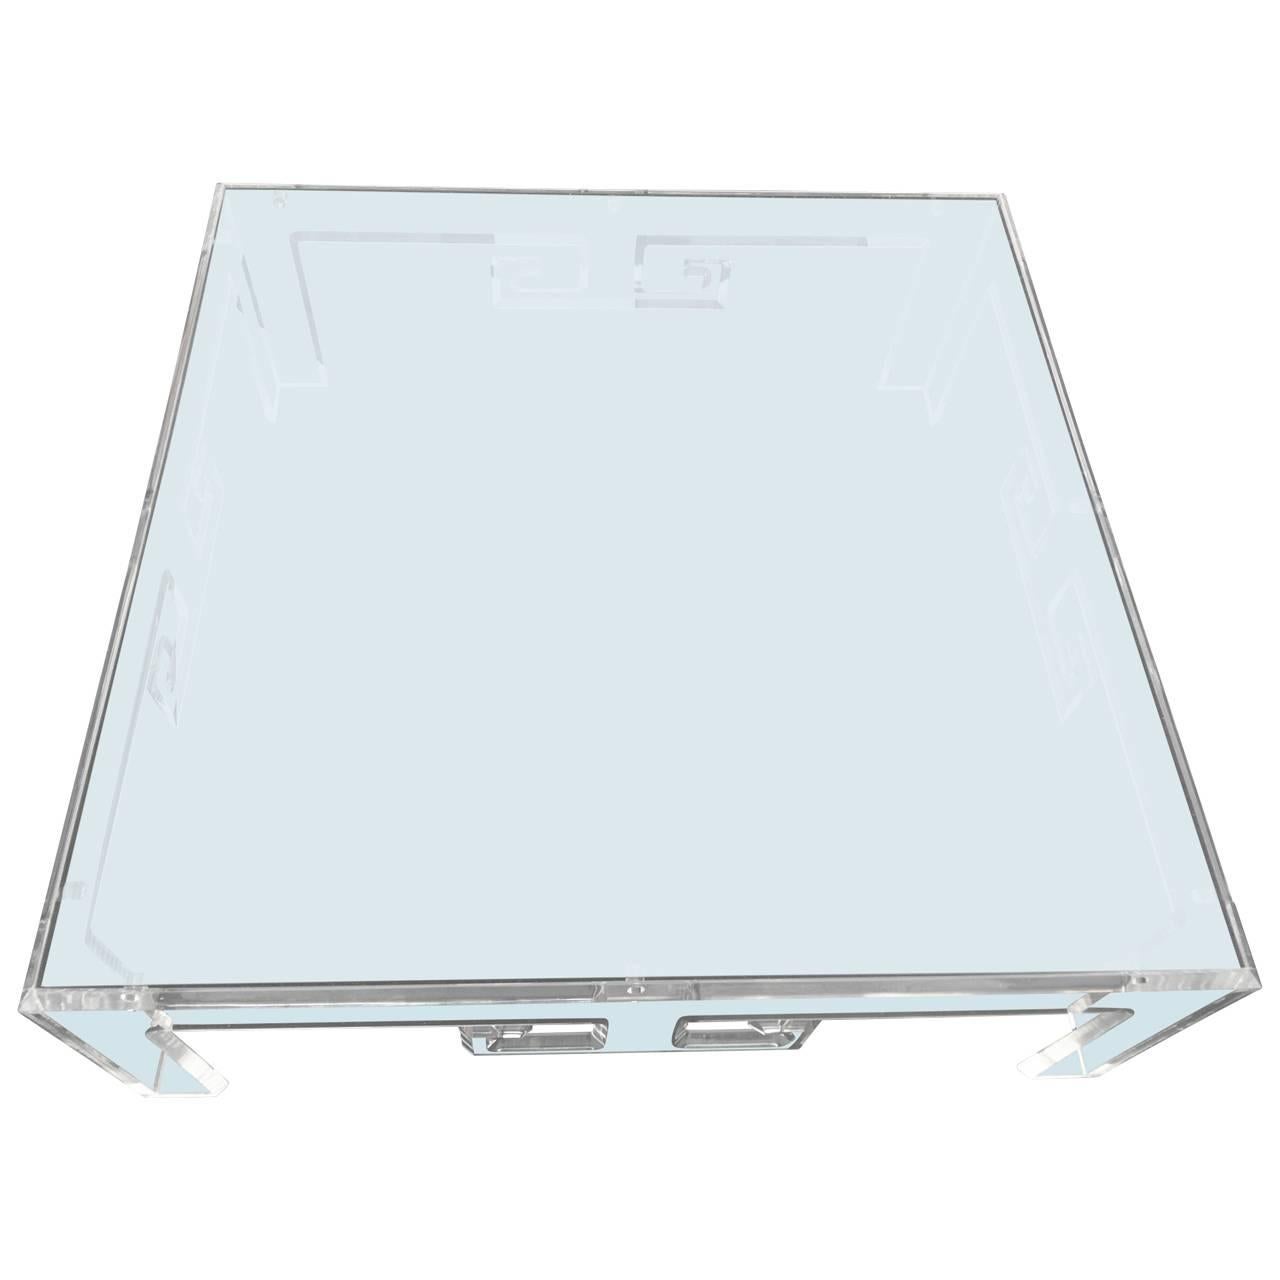 American Large Square Lucite Coffee Table